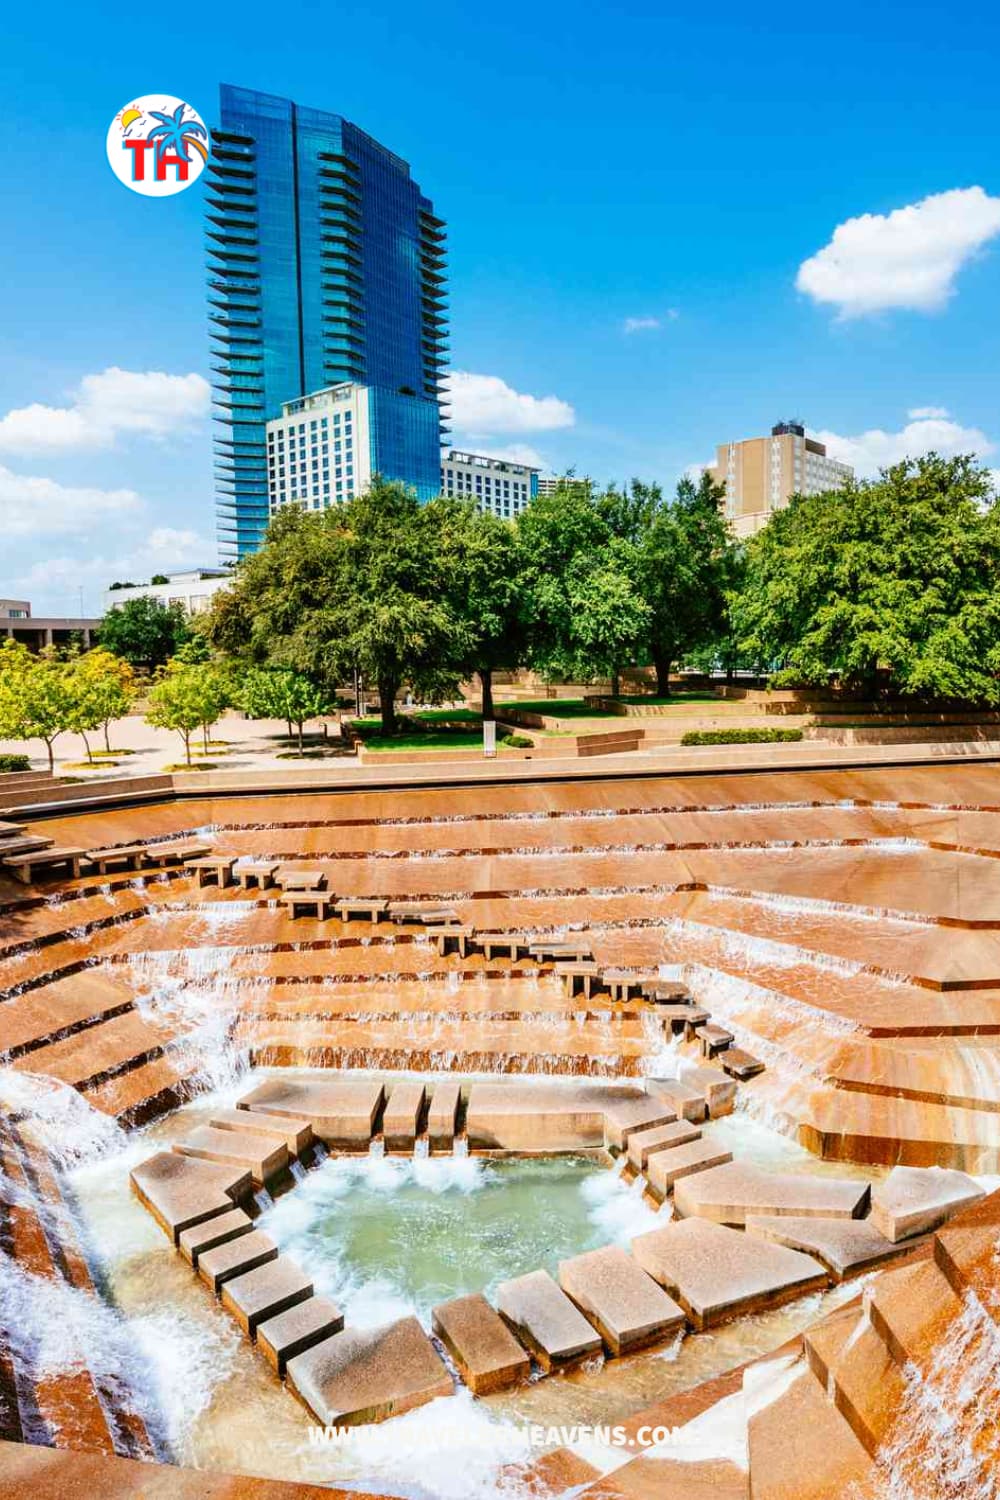 Romantic Things To Do in Fort Worth, Texas, Texas Travel Guide, Tourism, Travel to Texas, US Destination, Visit Fort Worth, World Traveler